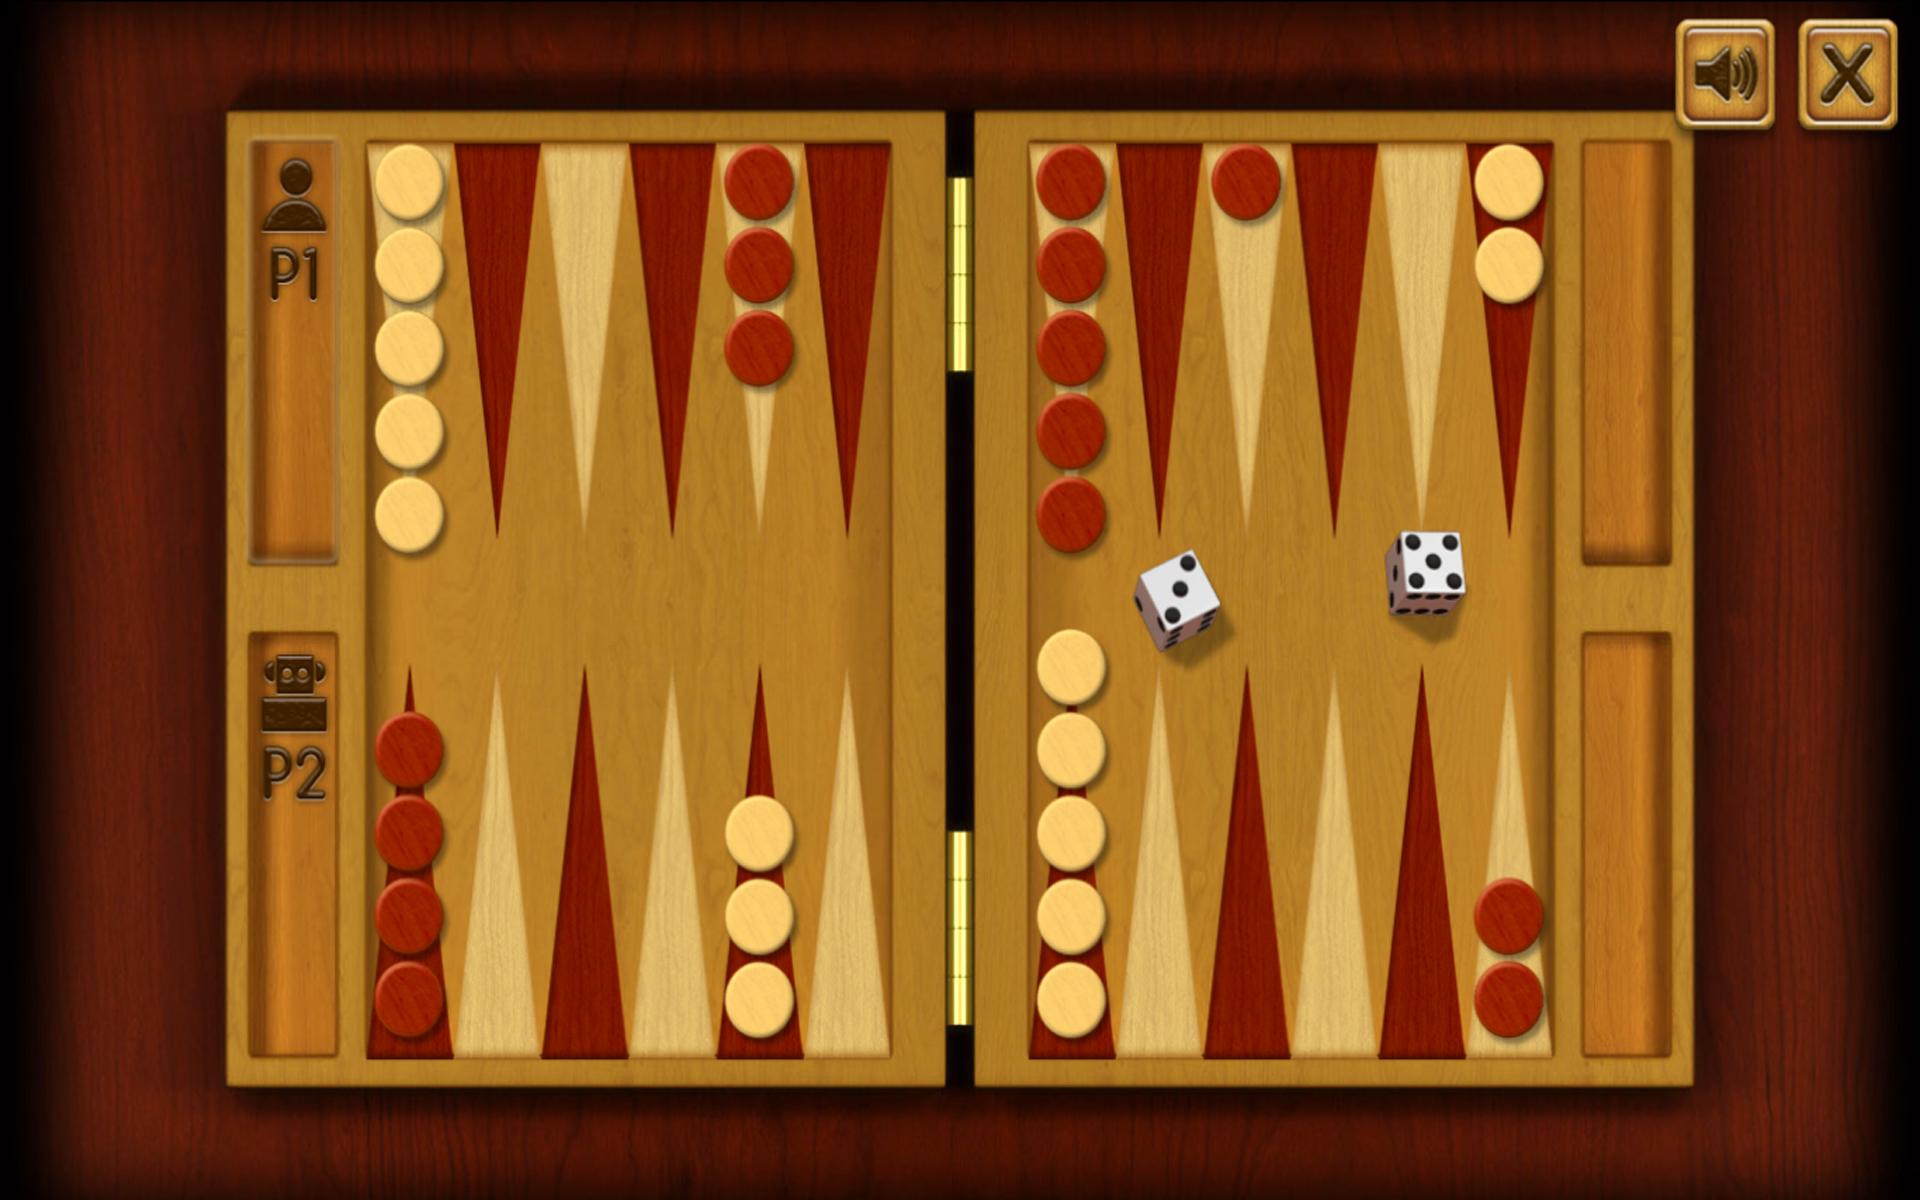 Backgammon for Android - APK Download